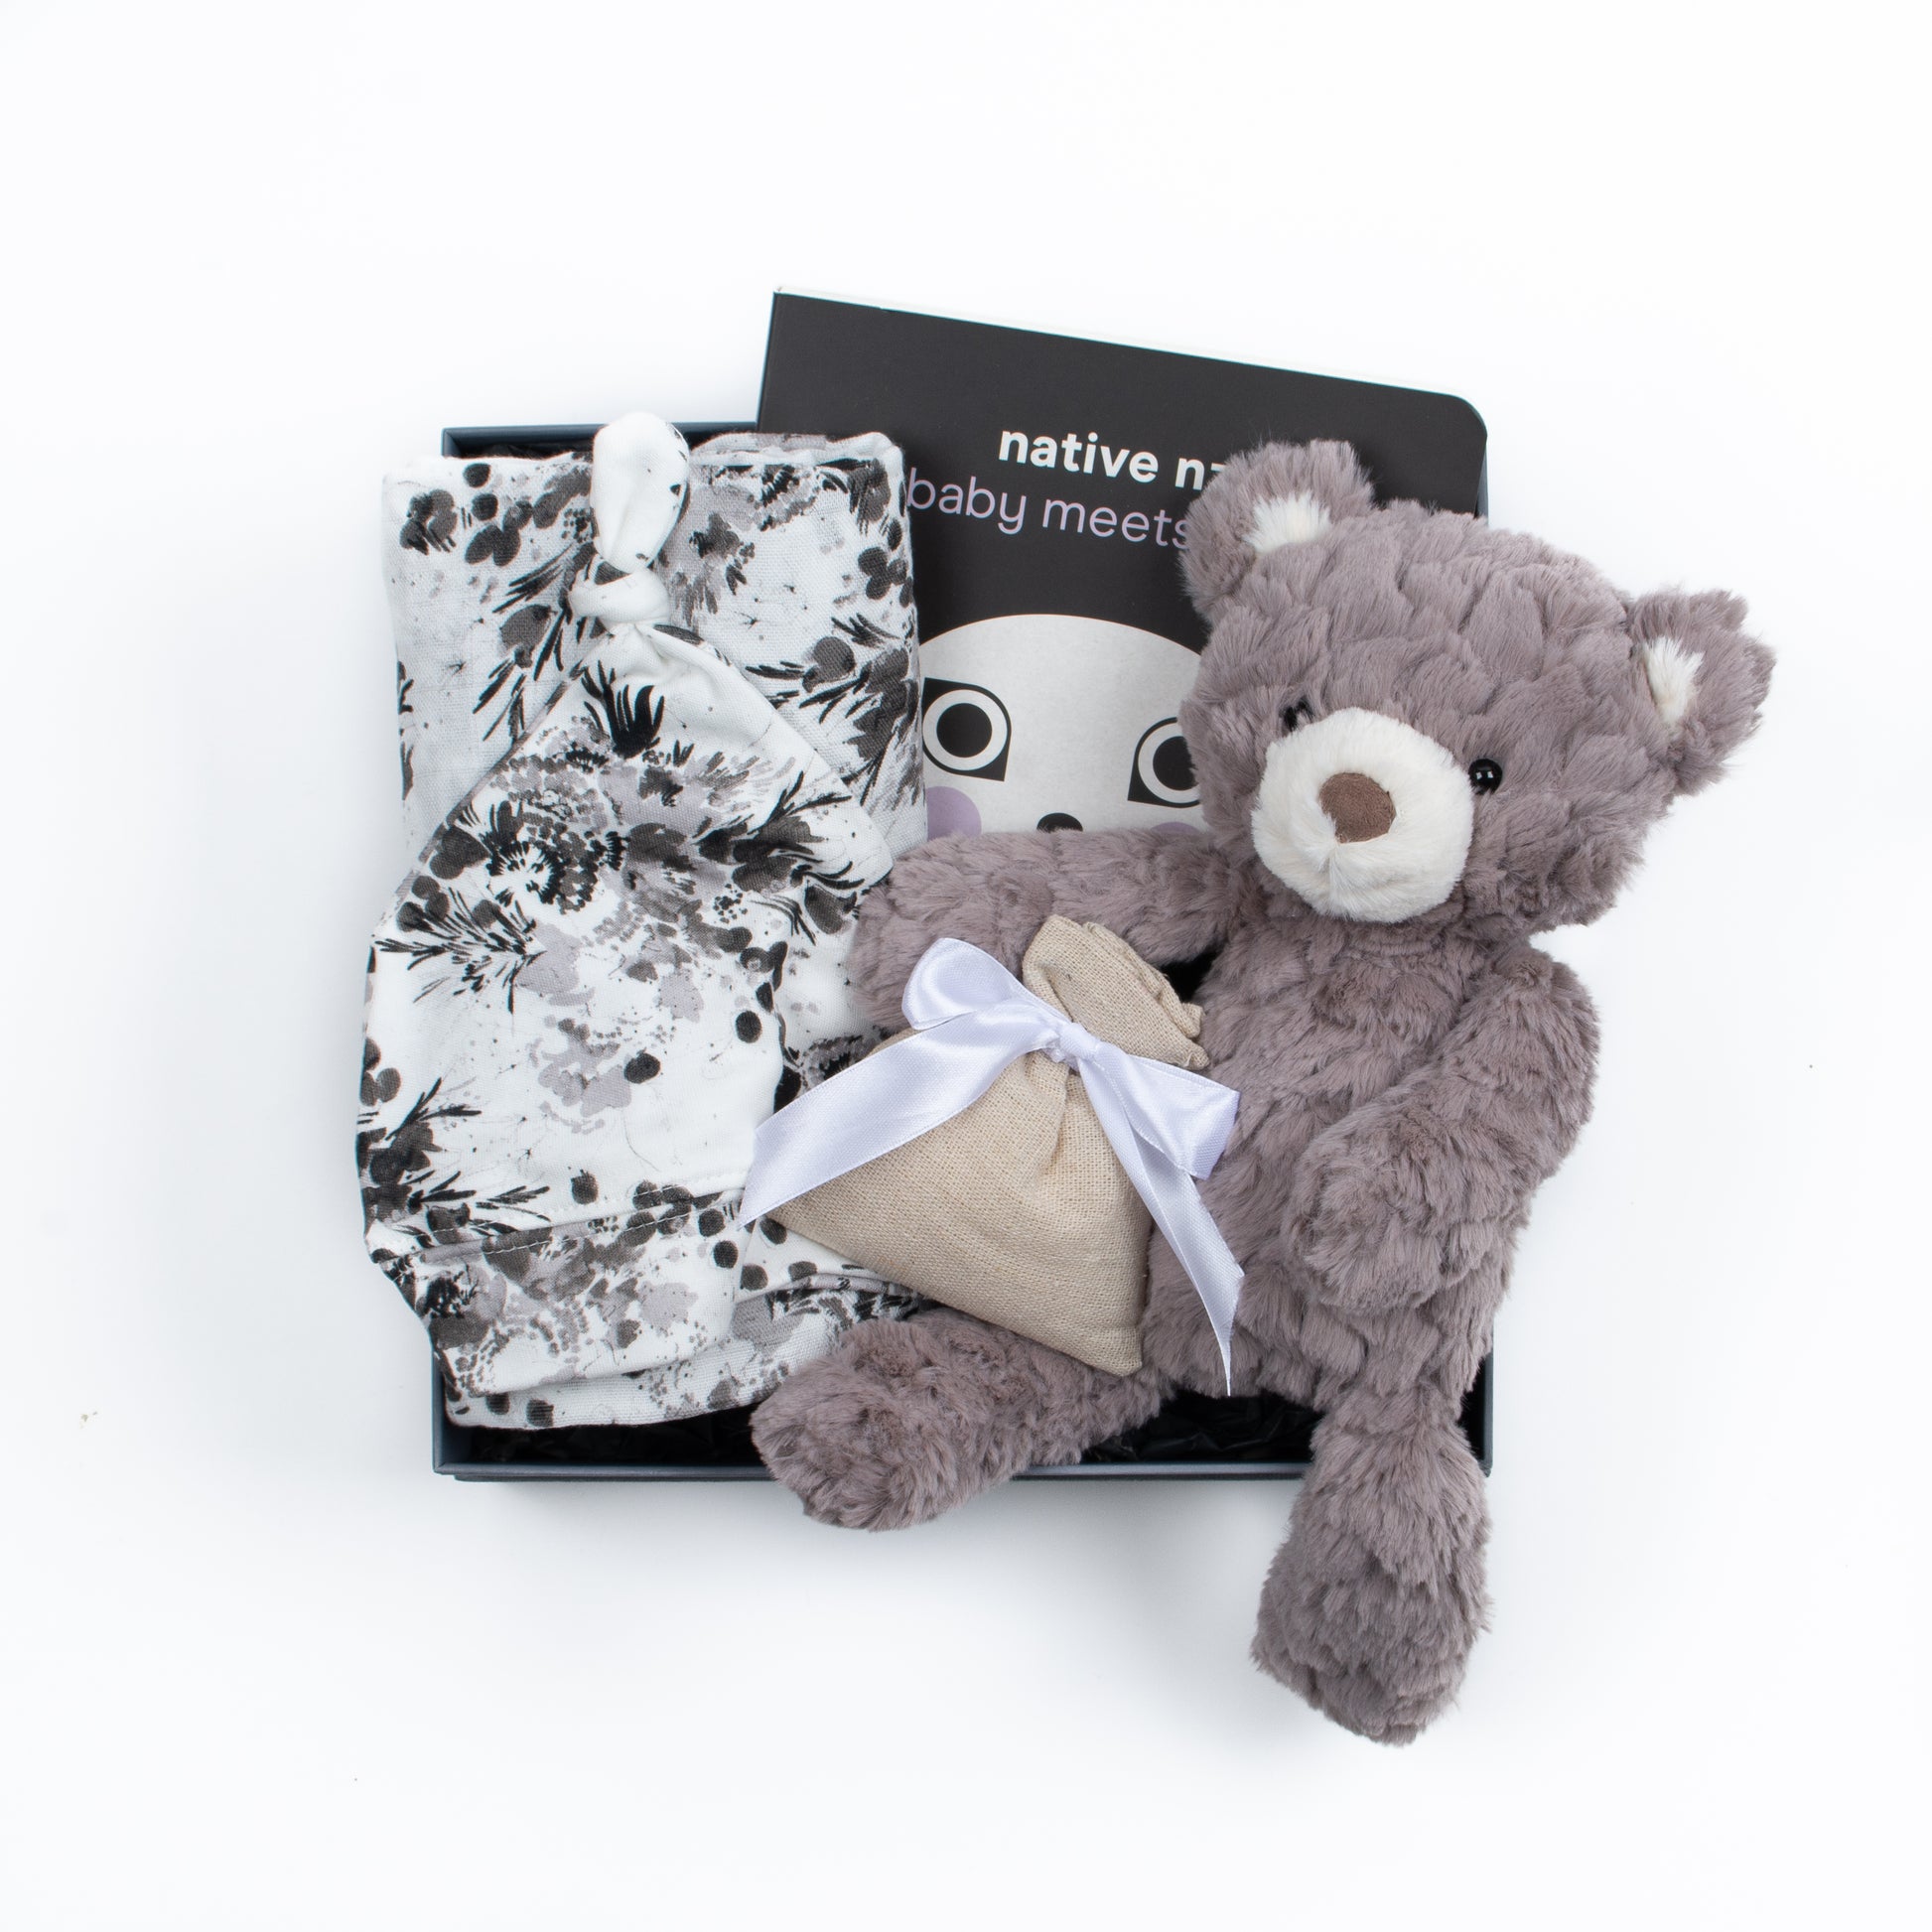 Gift box features swaddle and knot hat, soft toy, book, lavender pouch.